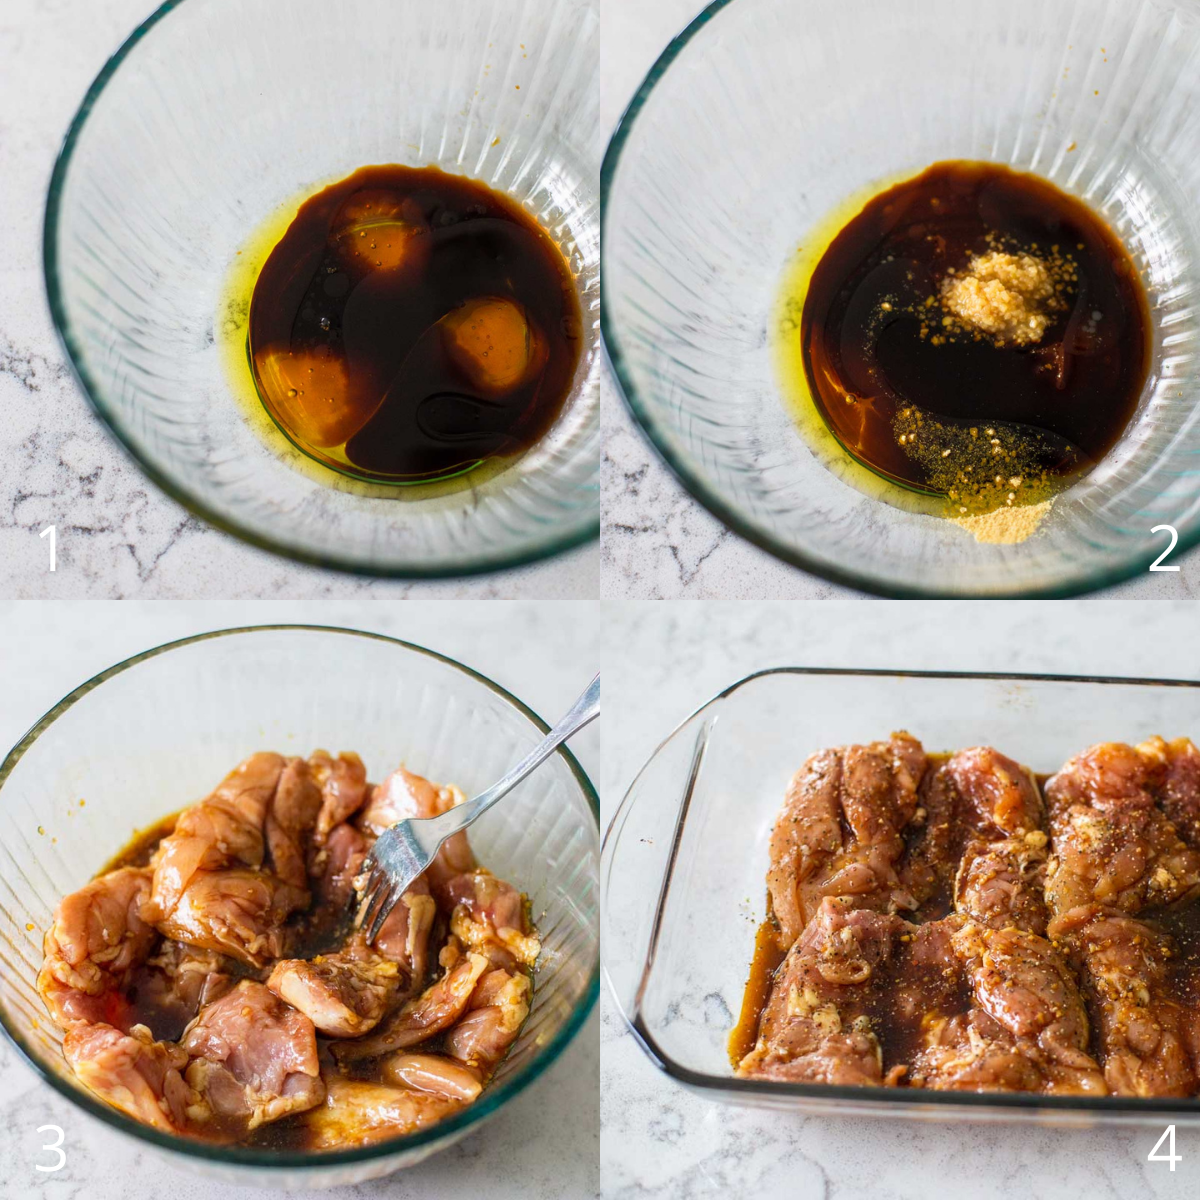 Step by step photos show how to mix up the marinade.